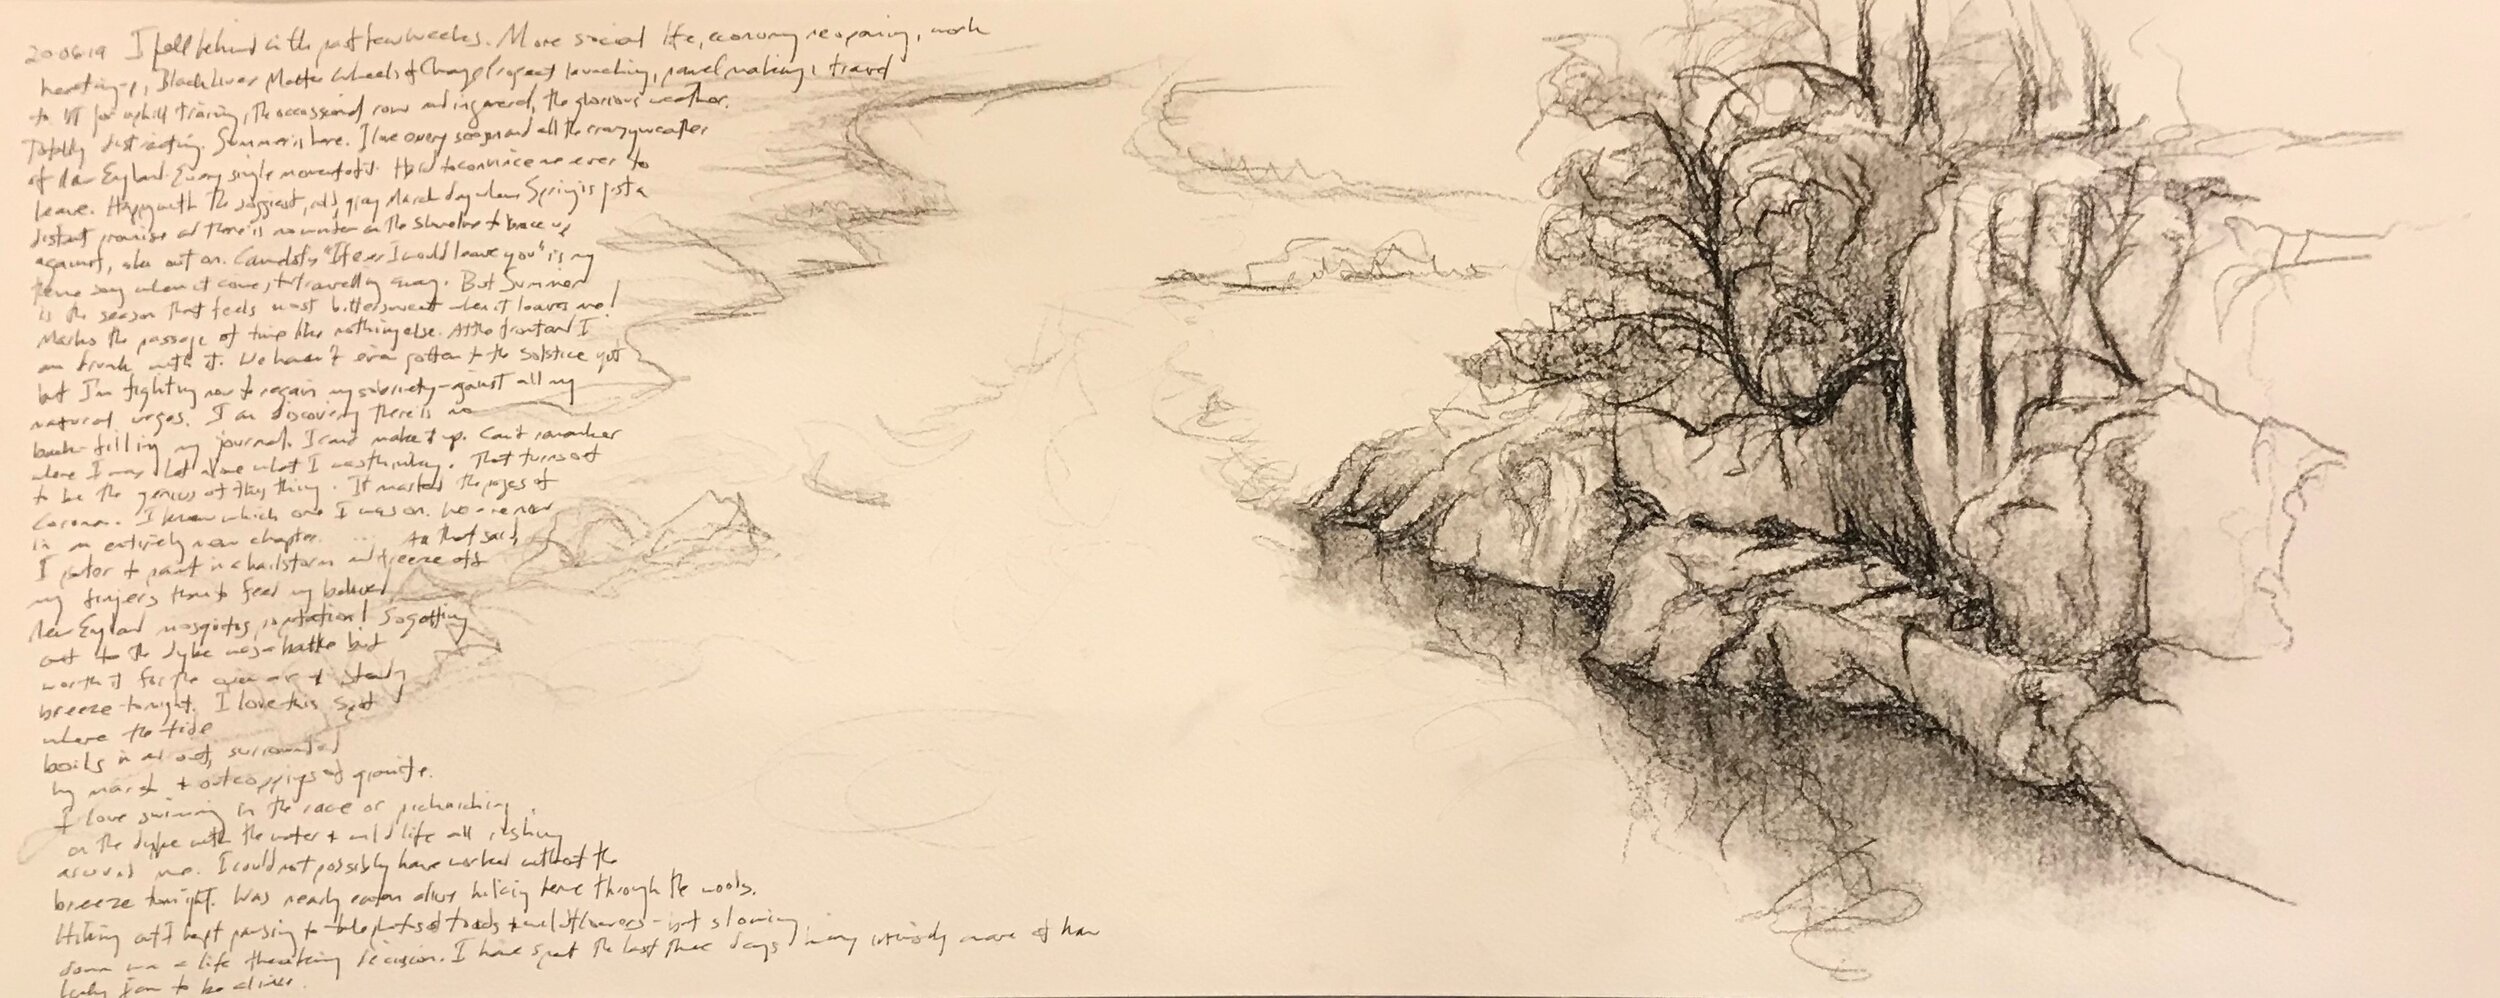 20-06-19  Northeast side of the Dyke  Charcoal on Paper  8 x 20 inches.jpg